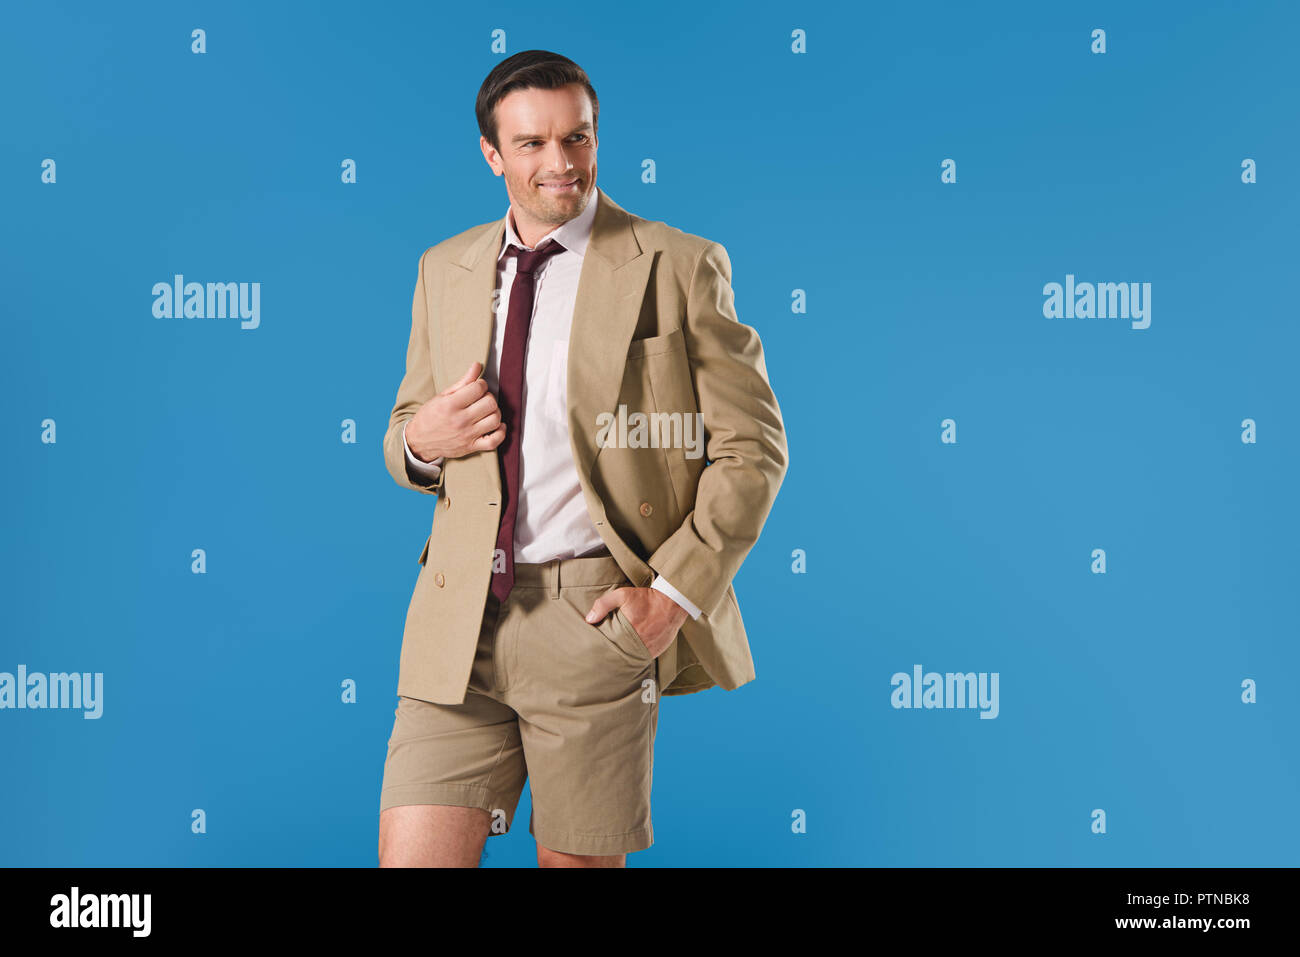 suit jacket and shorts